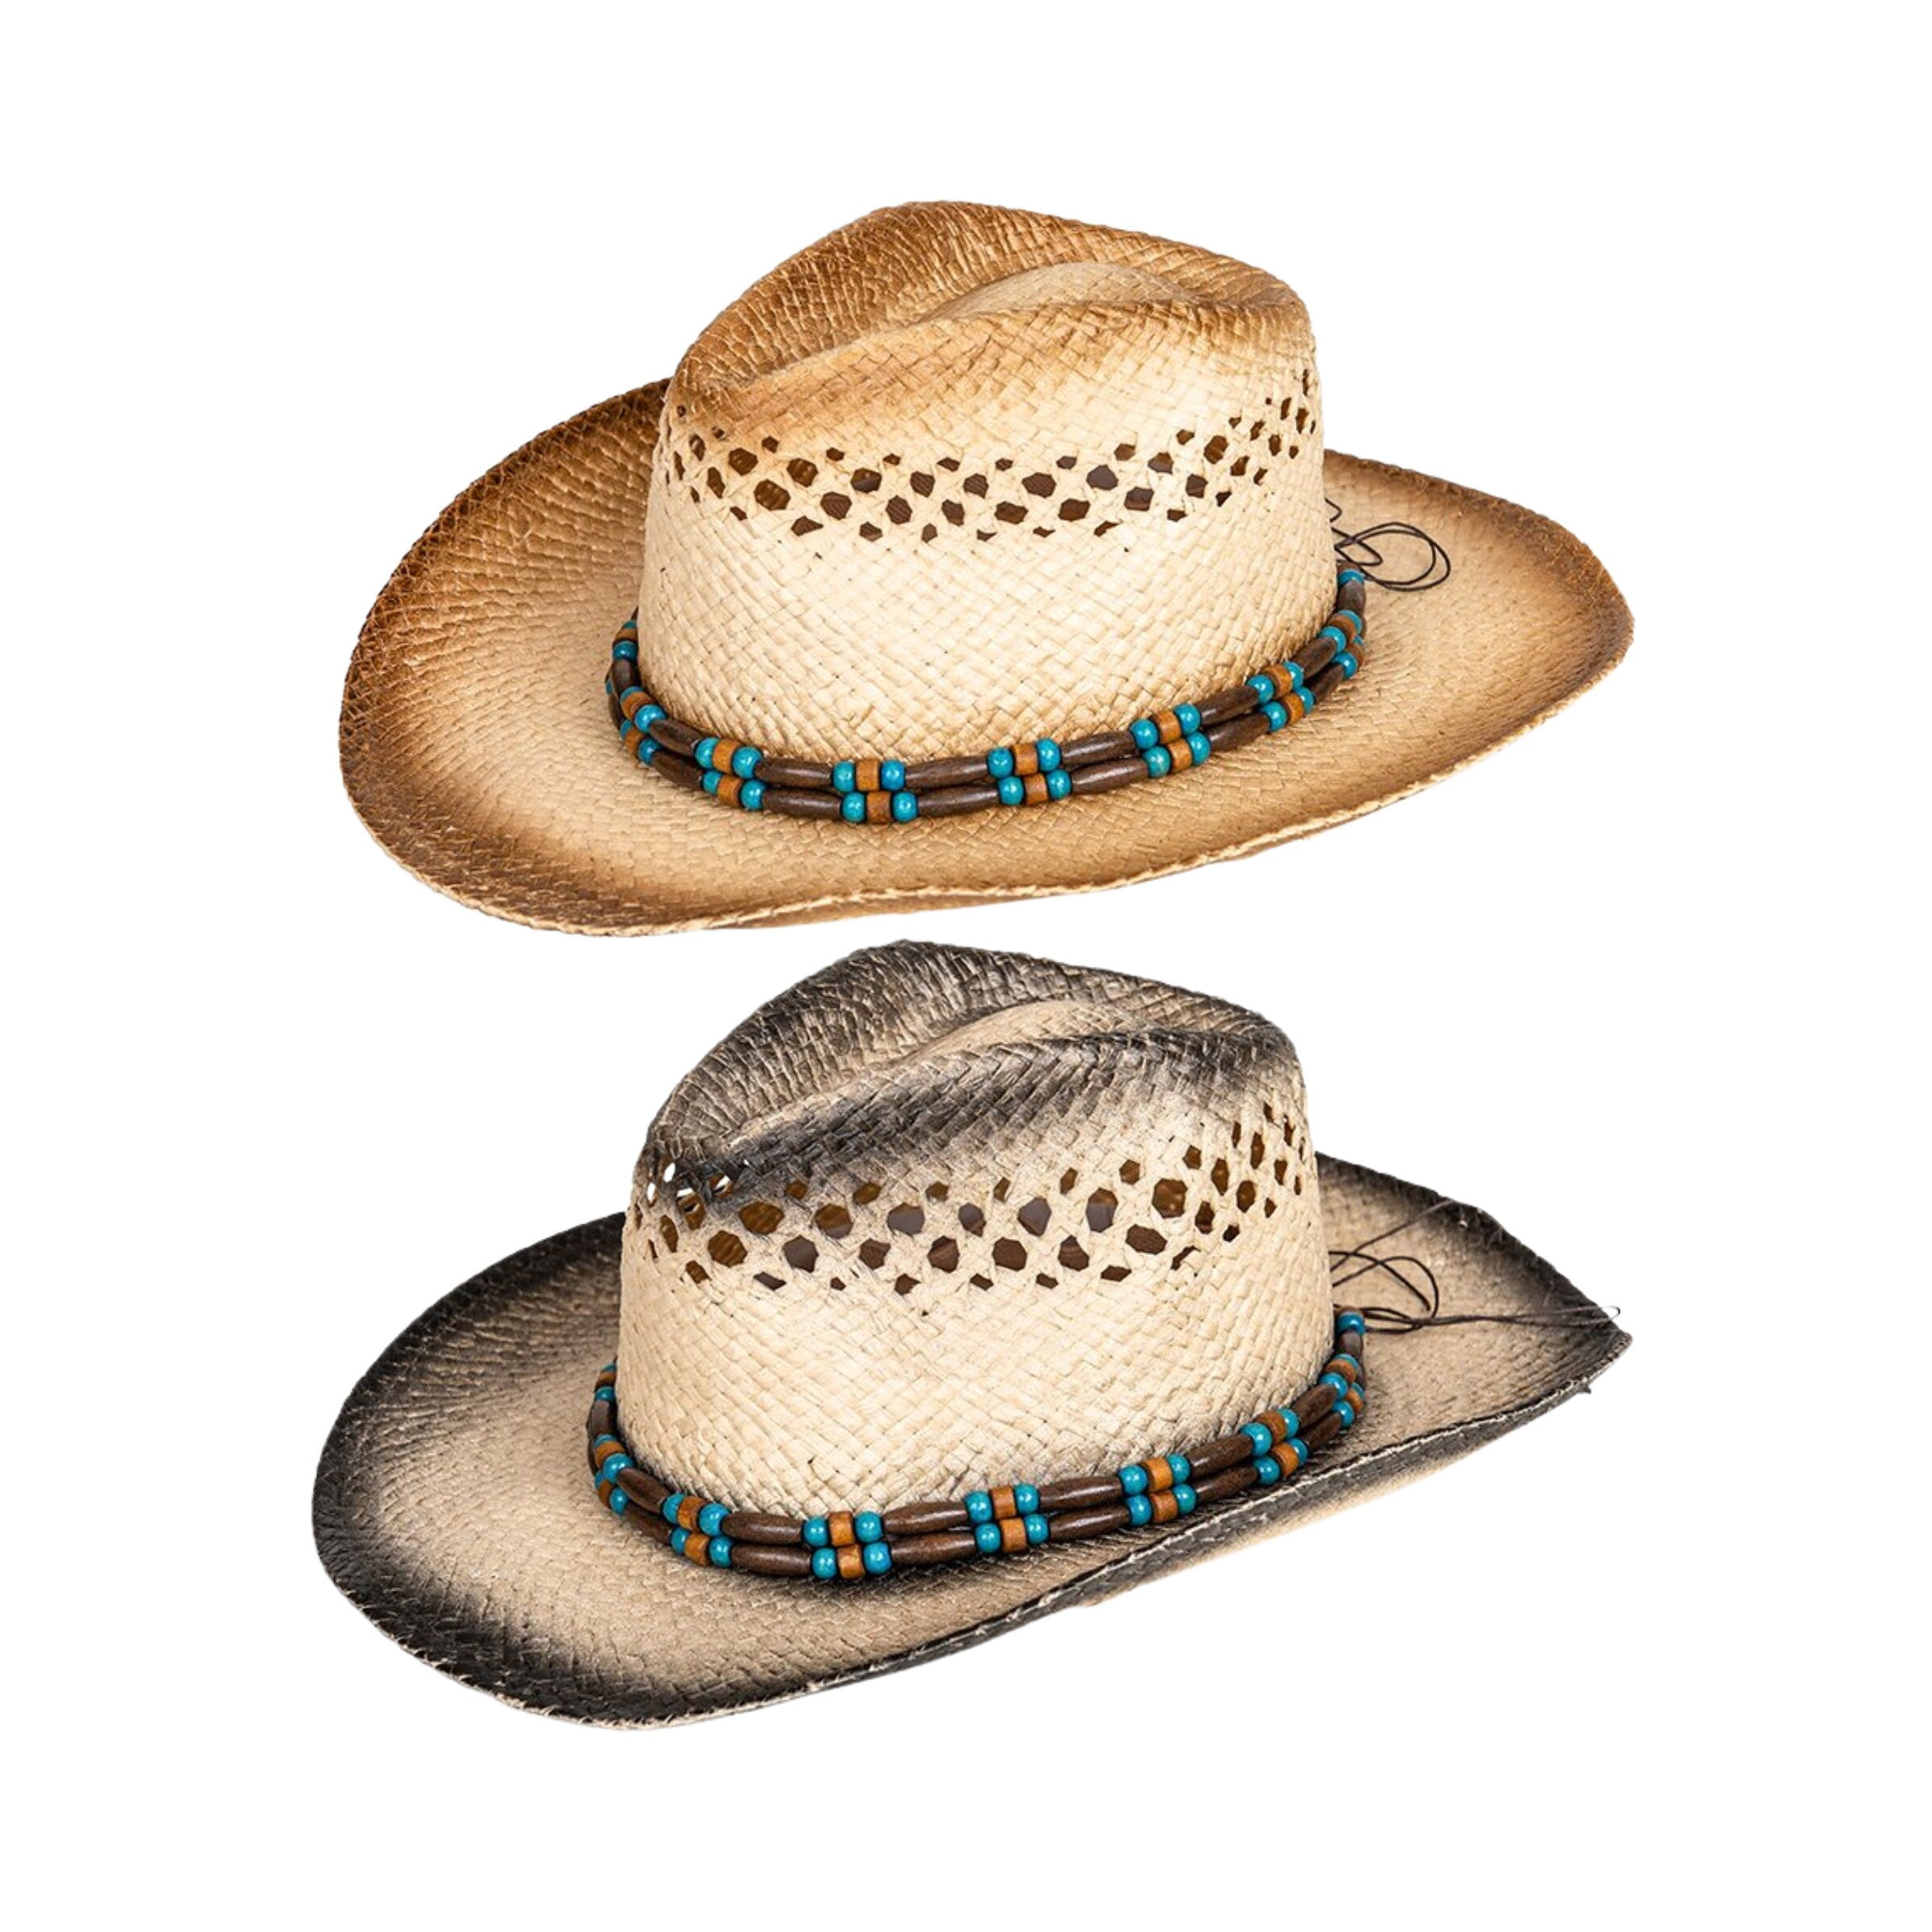 Unisex Straw Cowboy hat with Double bead band. 2 colors ,fast UK Post 48-72 hour delivery.